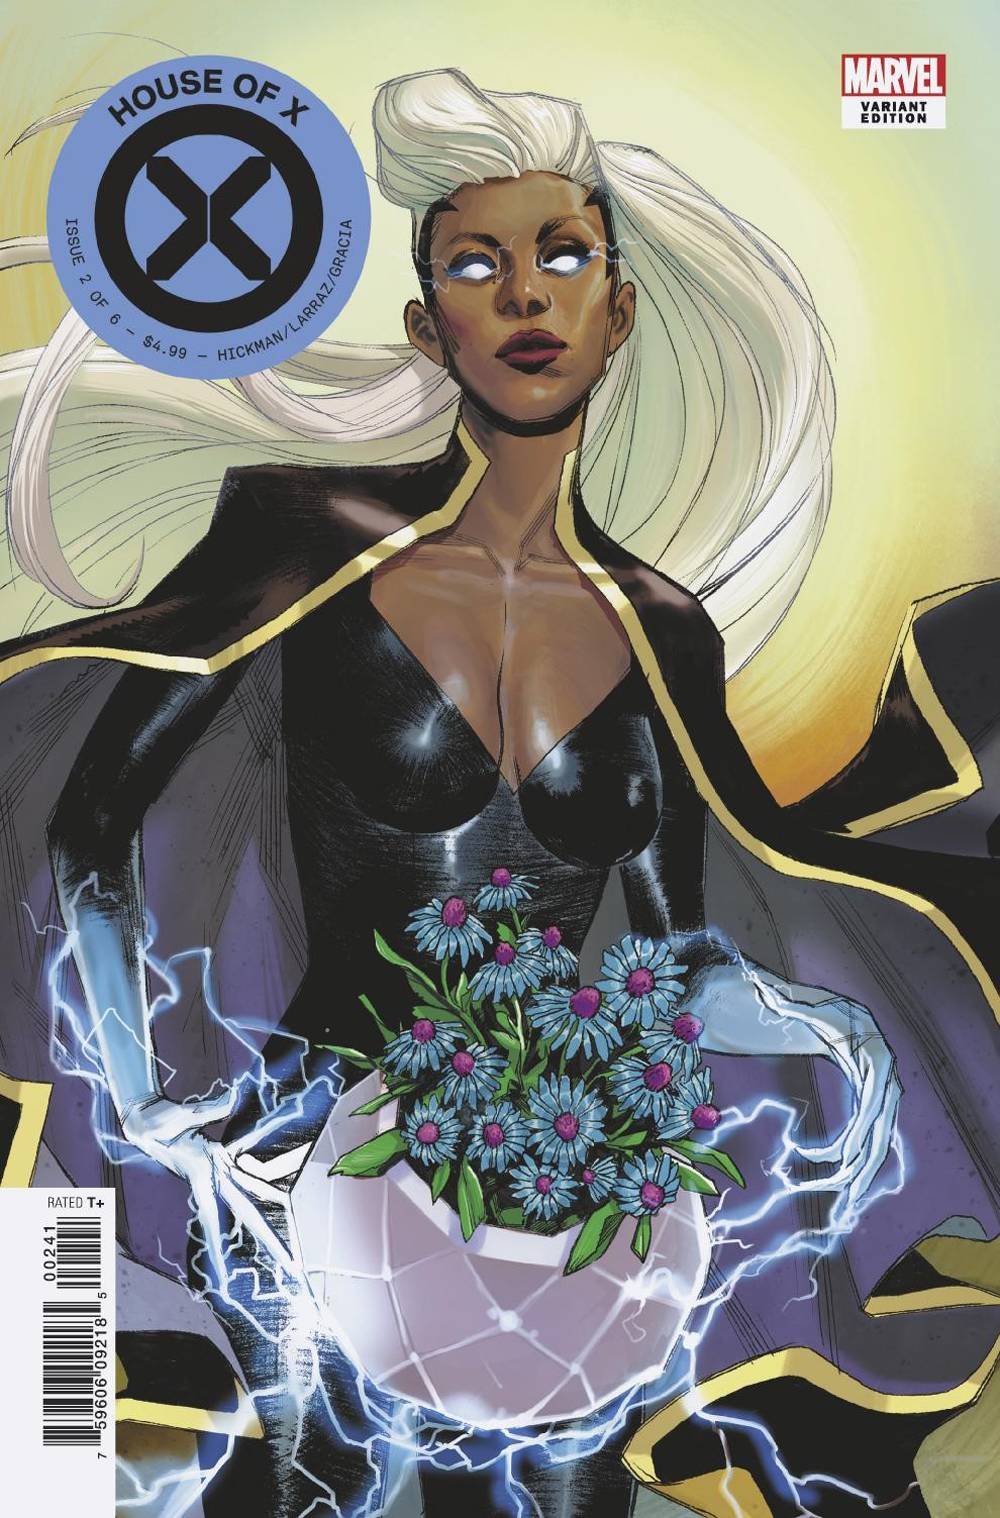 House of X #2 Pichelli Flower Variant (Of 6)